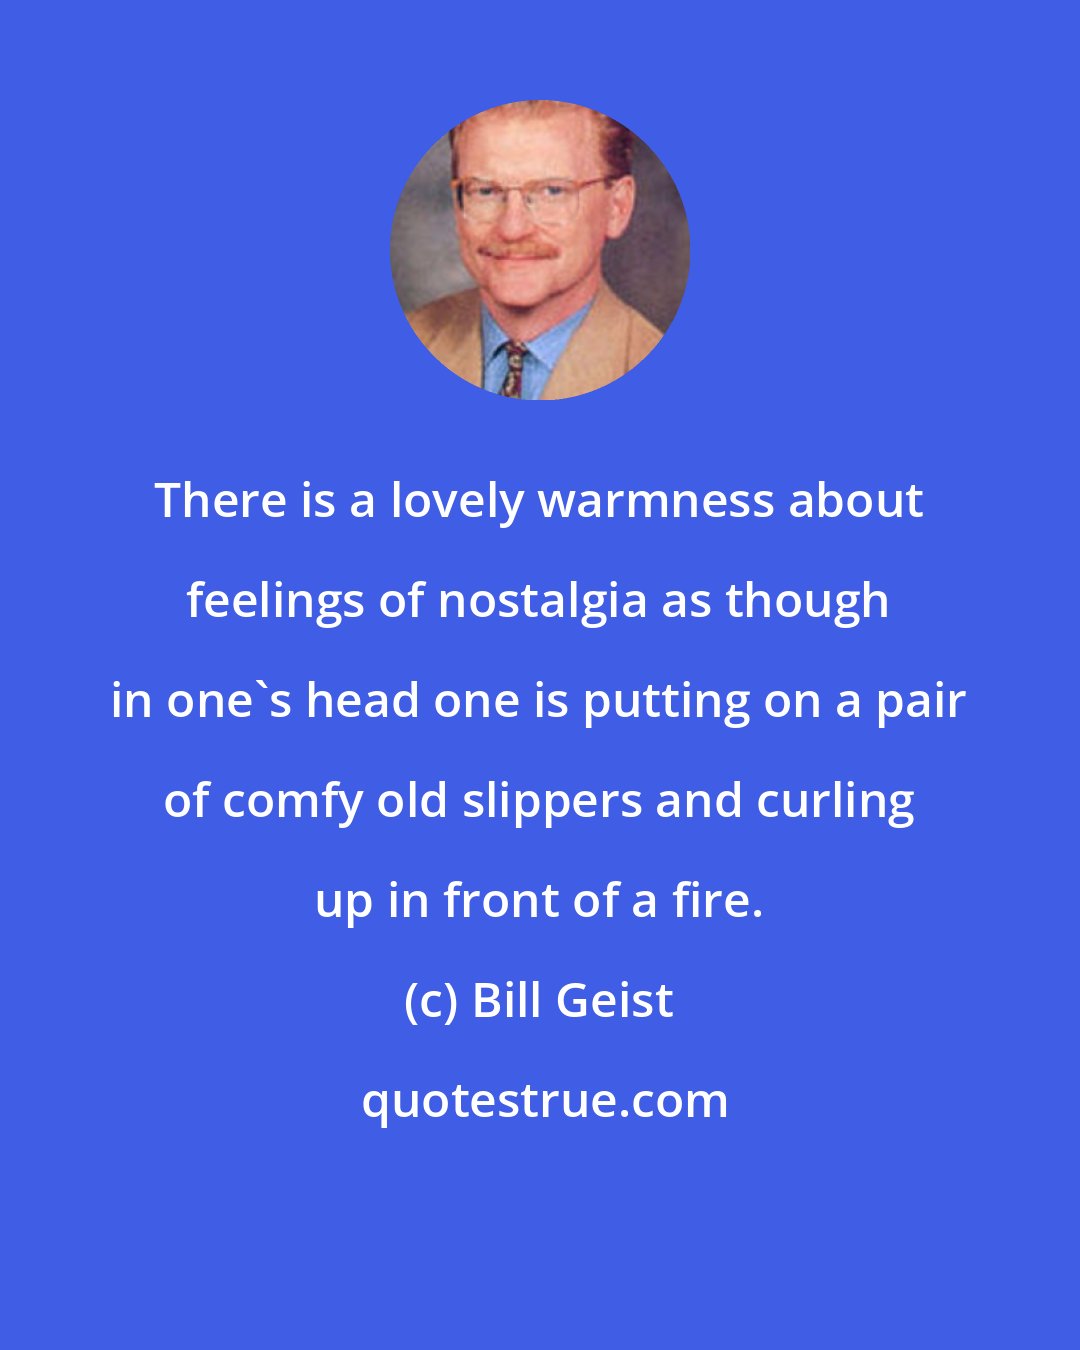 Bill Geist: There is a lovely warmness about feelings of nostalgia as though in one's head one is putting on a pair of comfy old slippers and curling up in front of a fire.